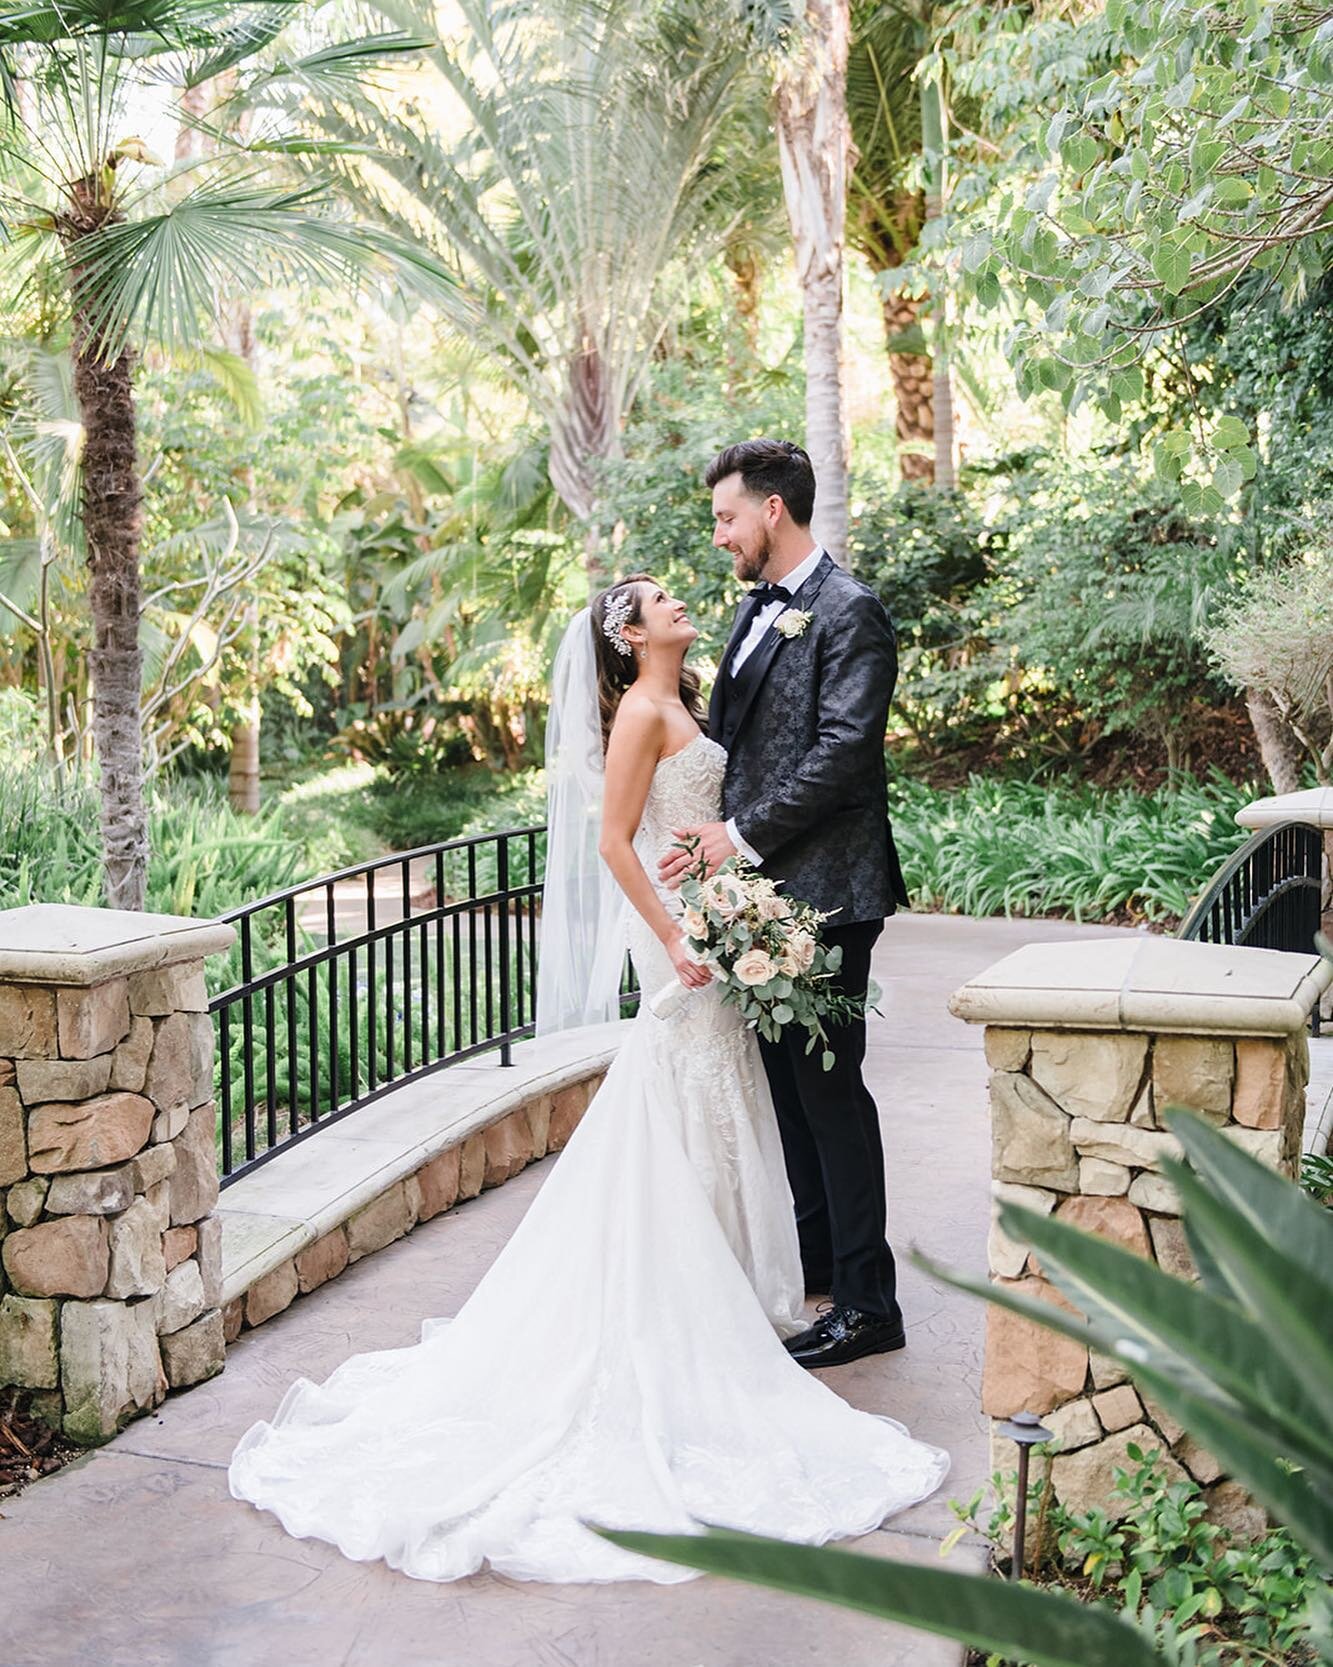 We loved this sweet couple! ❤️ &amp; look at that GORG hair piece! 😍

@grandtraditionestate